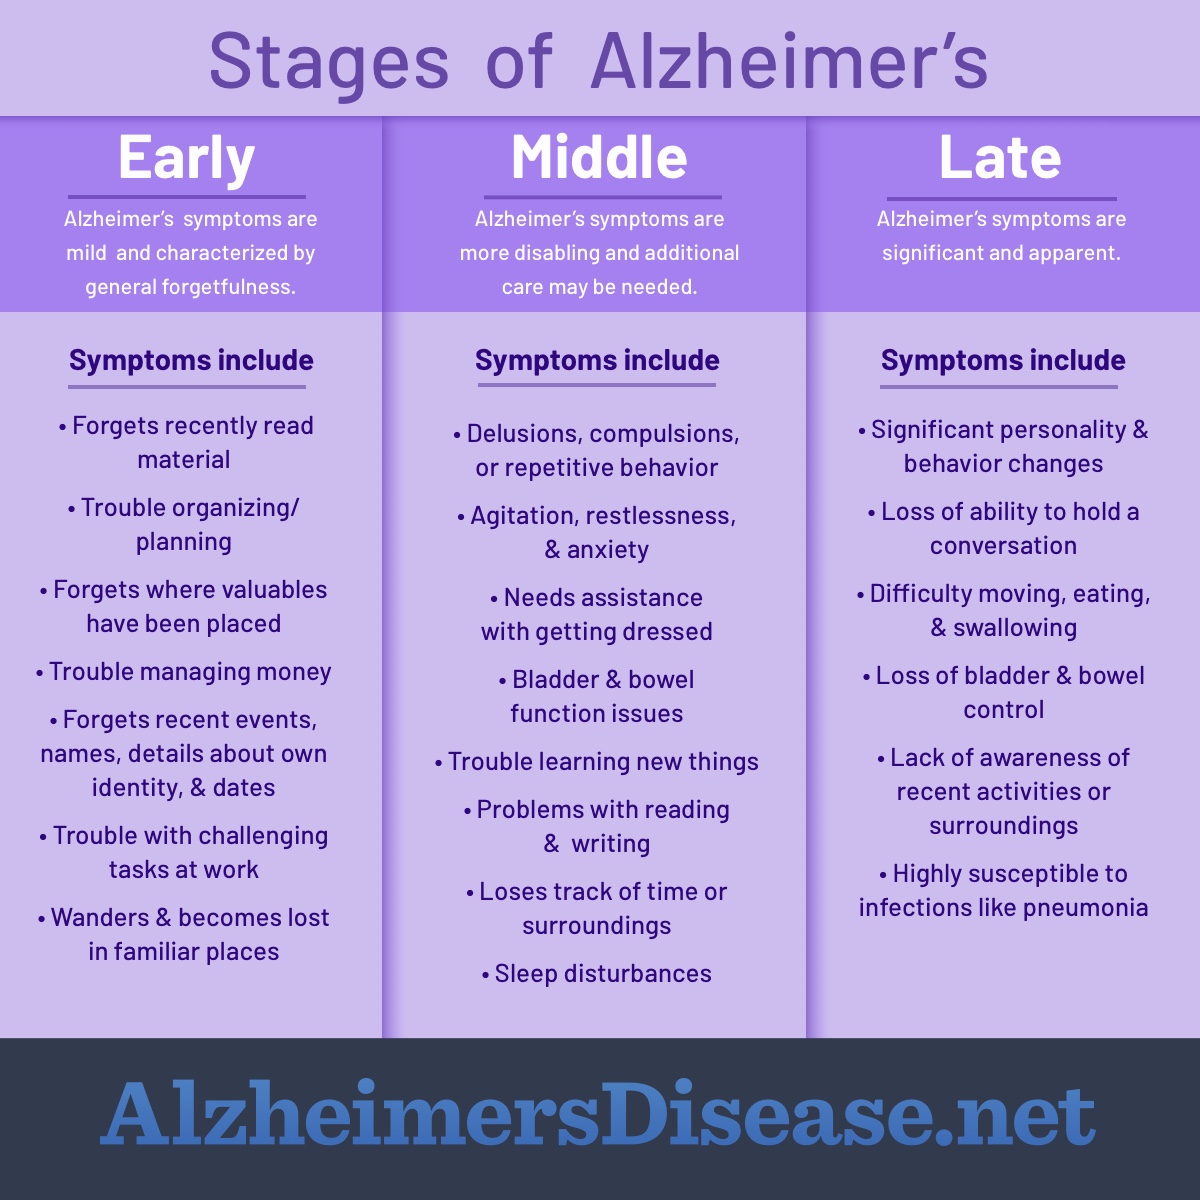 What Are the Stages of Alzheimer